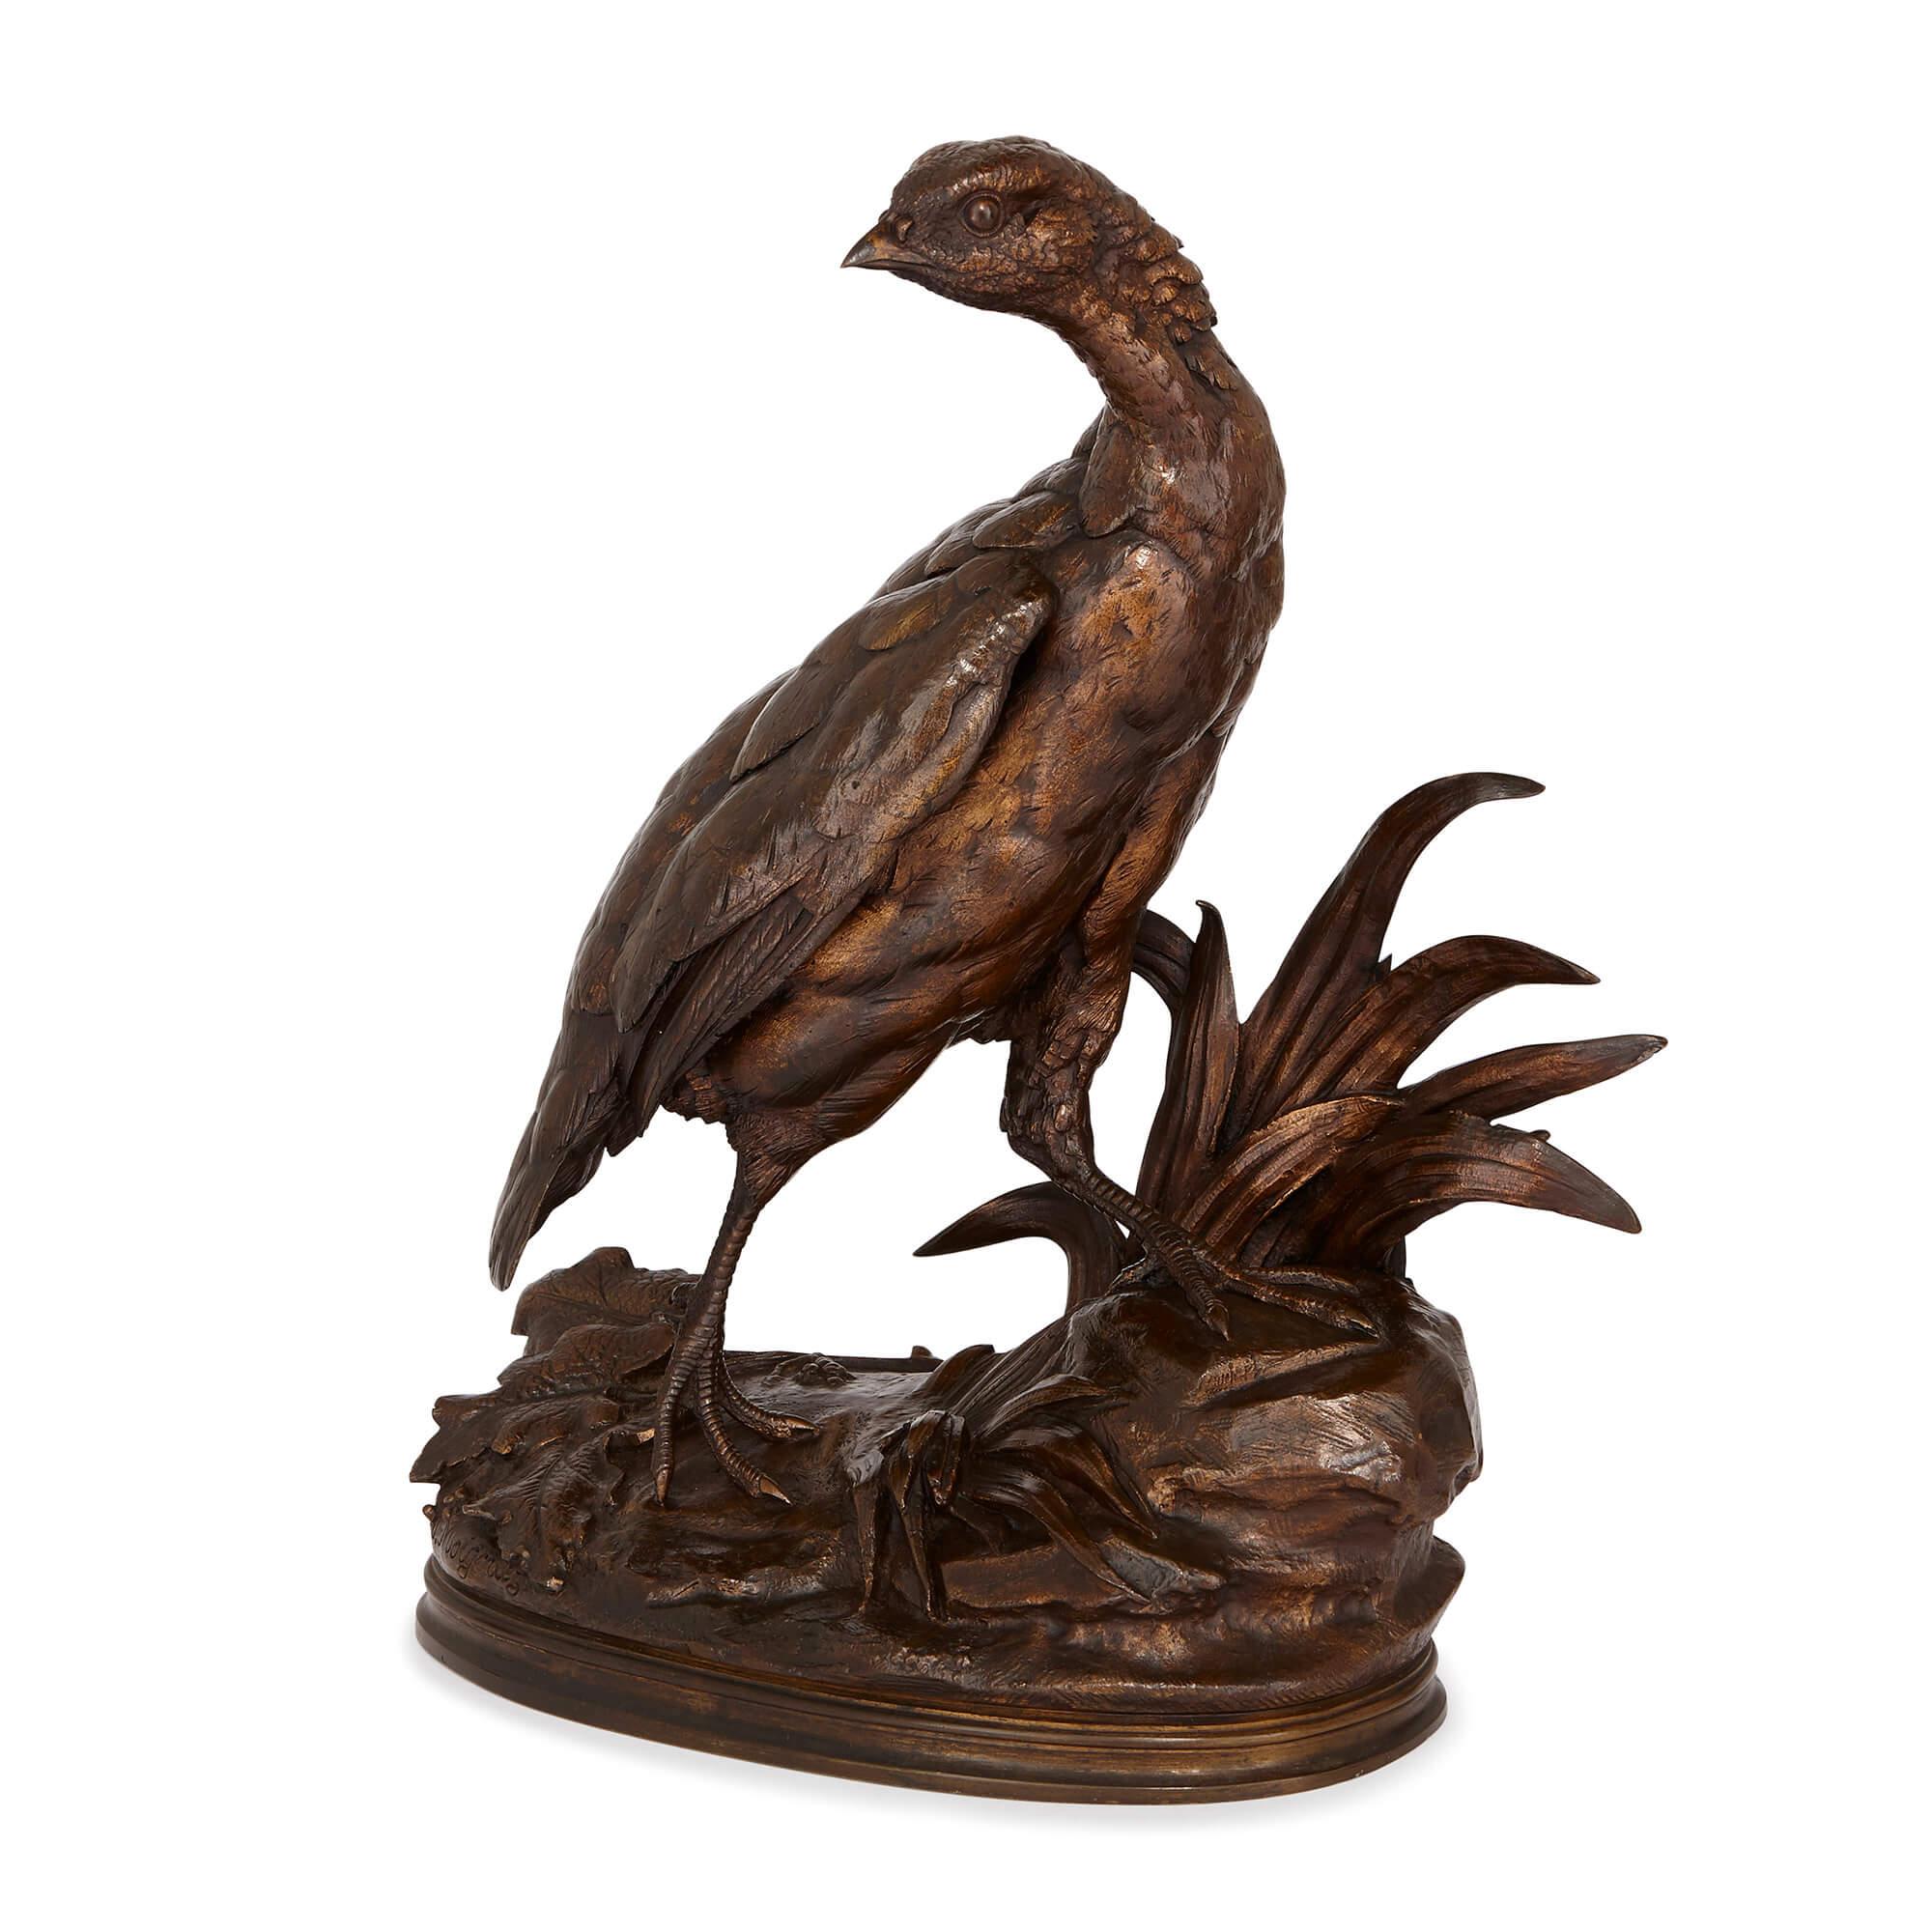 This pair of bronze figures of birds will make charming additions to a mantelpiece or table. They date from the late 19th century in France - an era known as the Belle Epoque (or 'beautiful age') - and were completed by the accomplished French